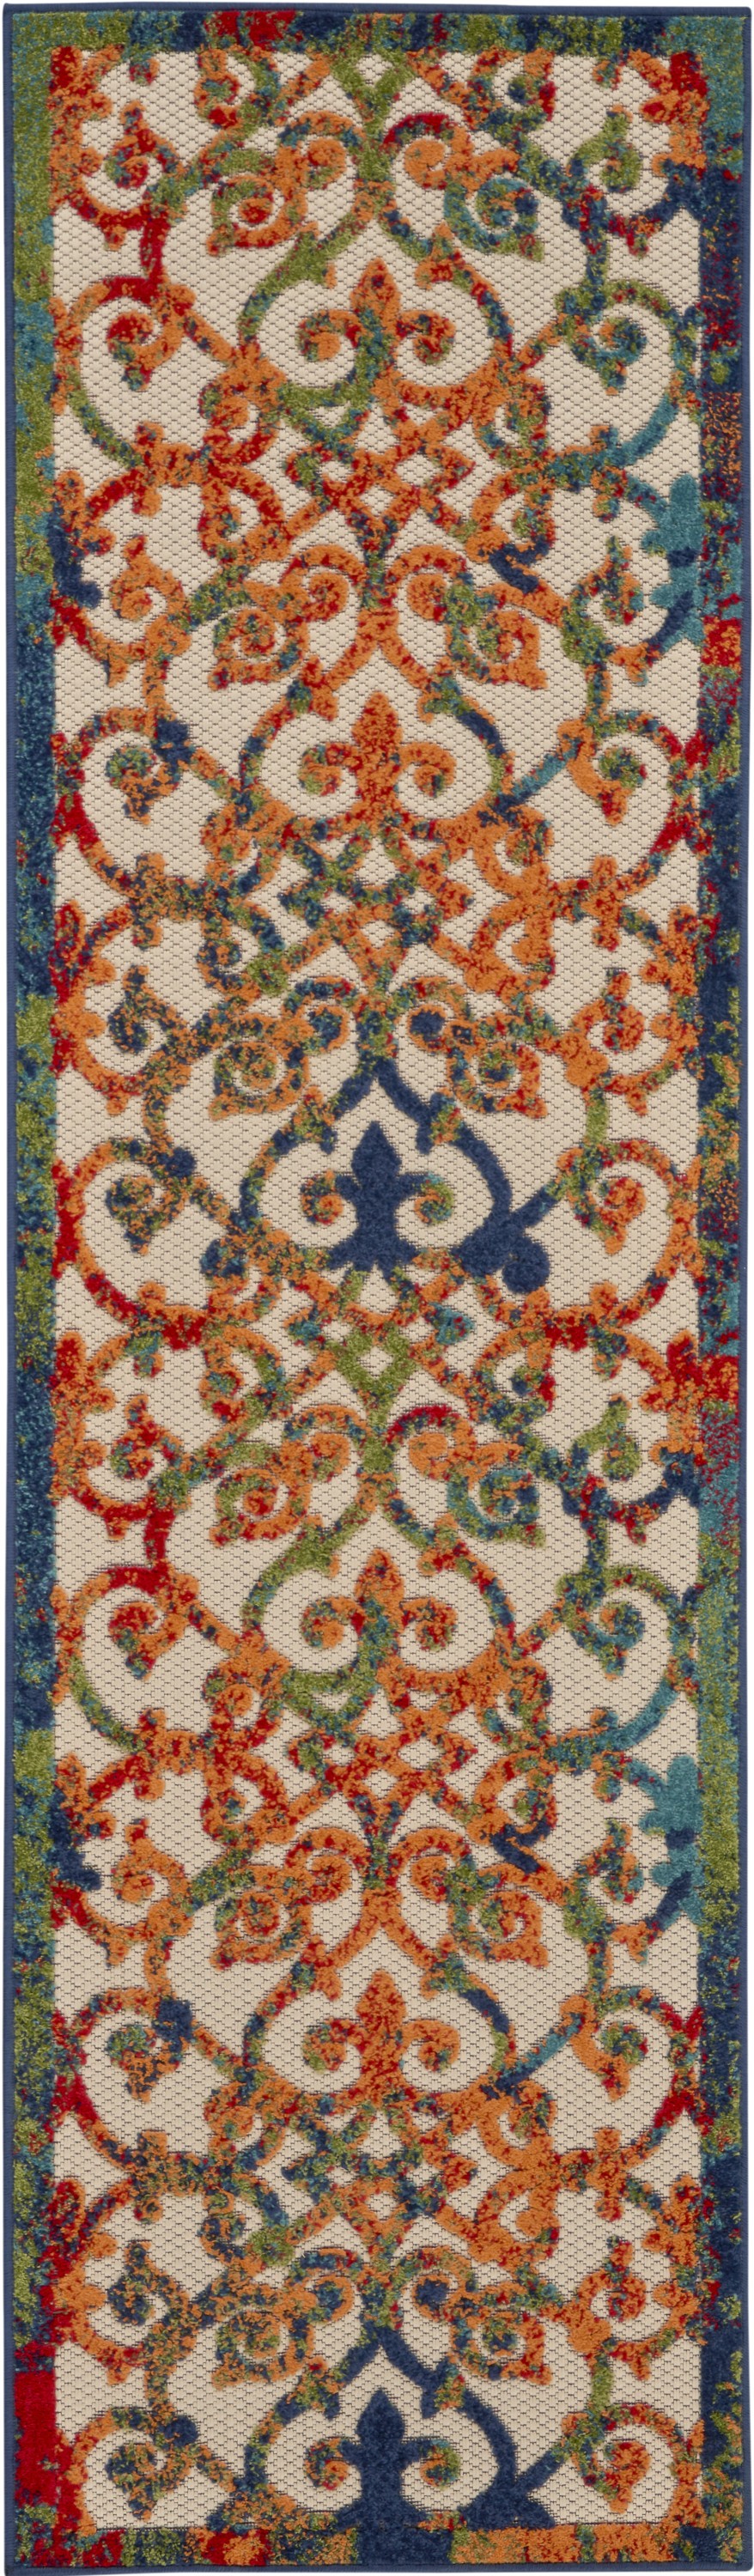 2' X 8' Ivory And Blue Floral Indoor Outdoor Area Rug-385025-1